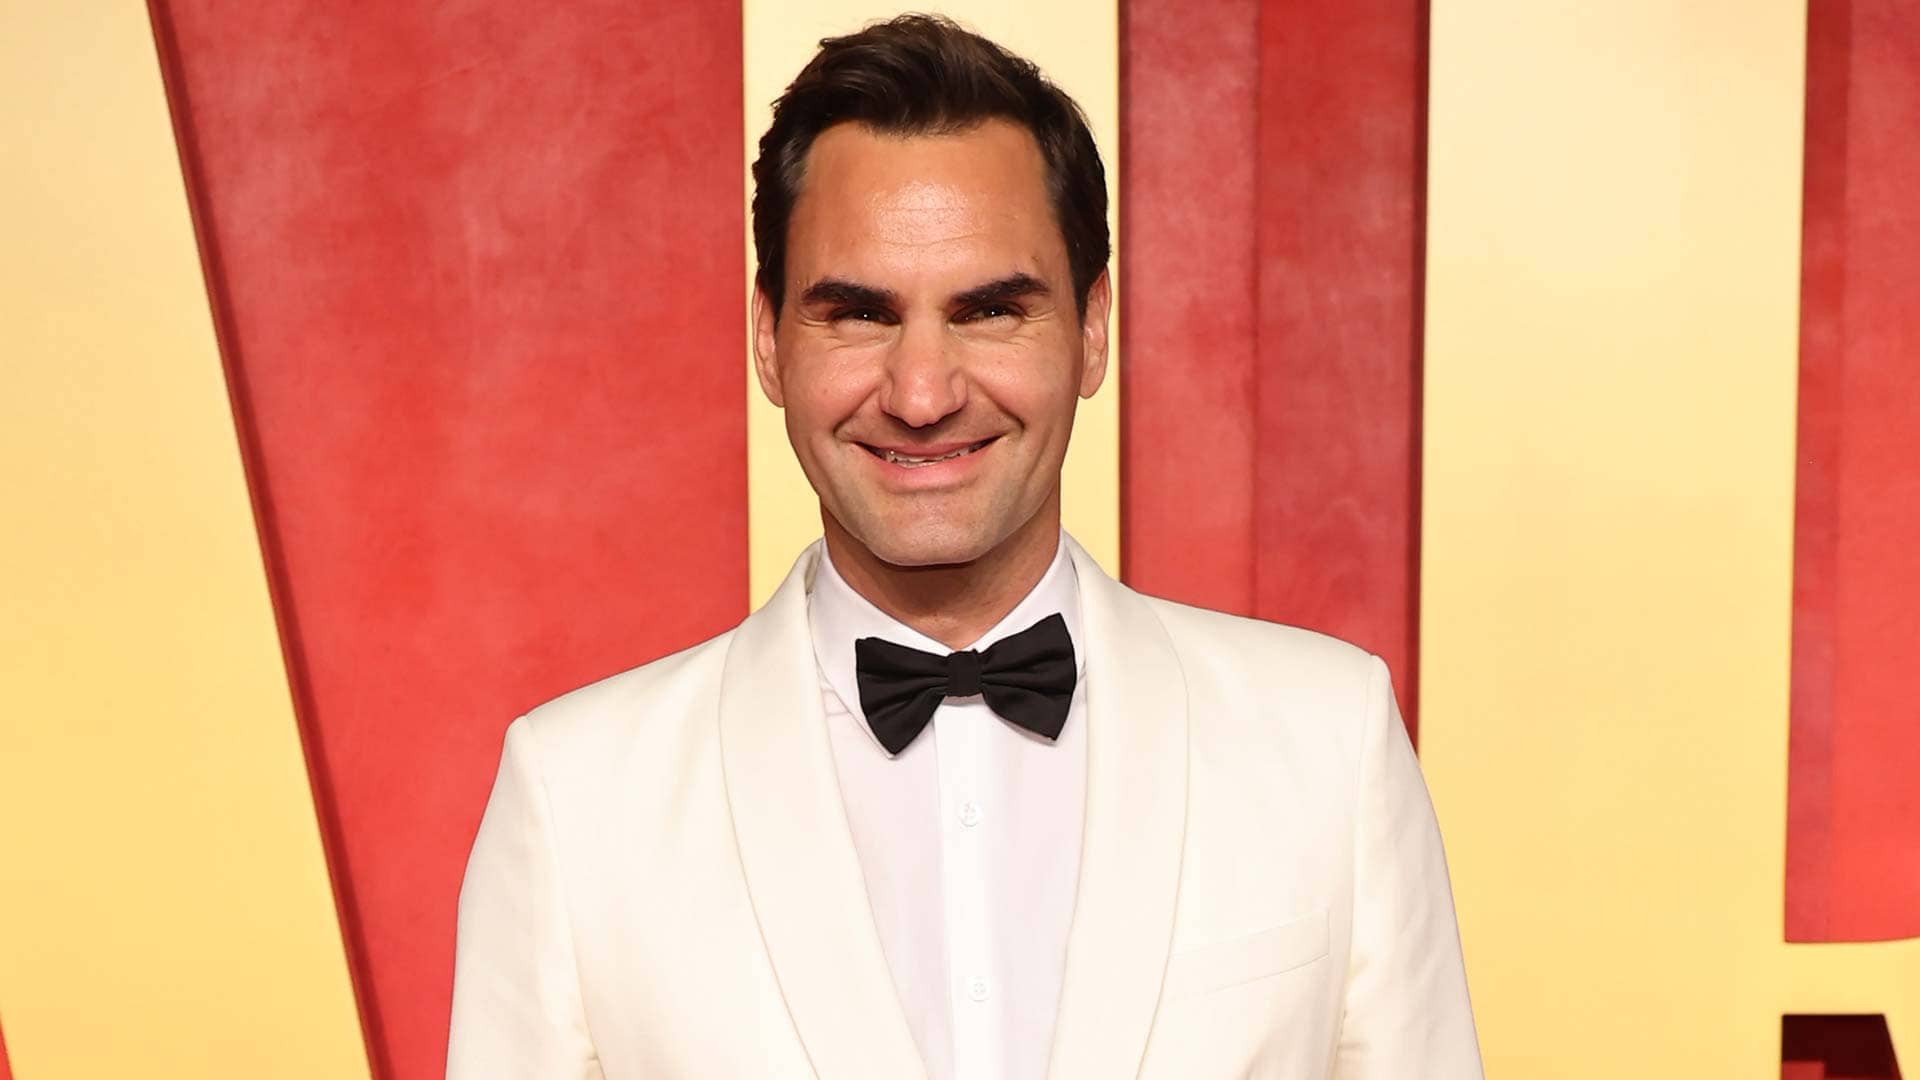 Roger Federer will address the Dartmouth College Class of 2024 on 9 June.